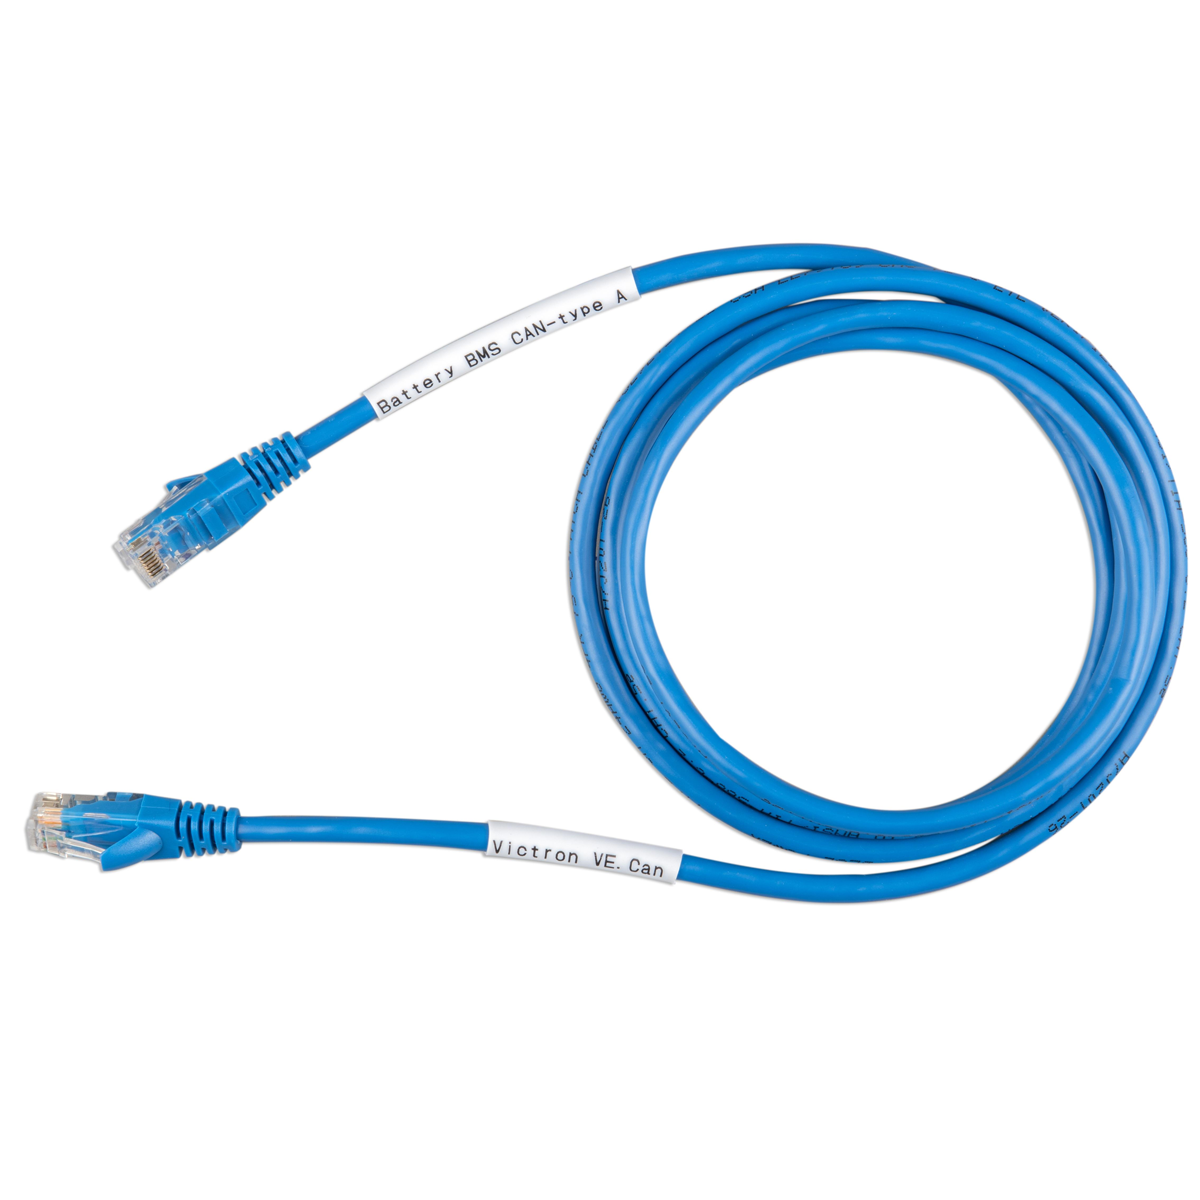 Victron VE.Can to CAN-bus BMS Typ A Kabel 1.8 m